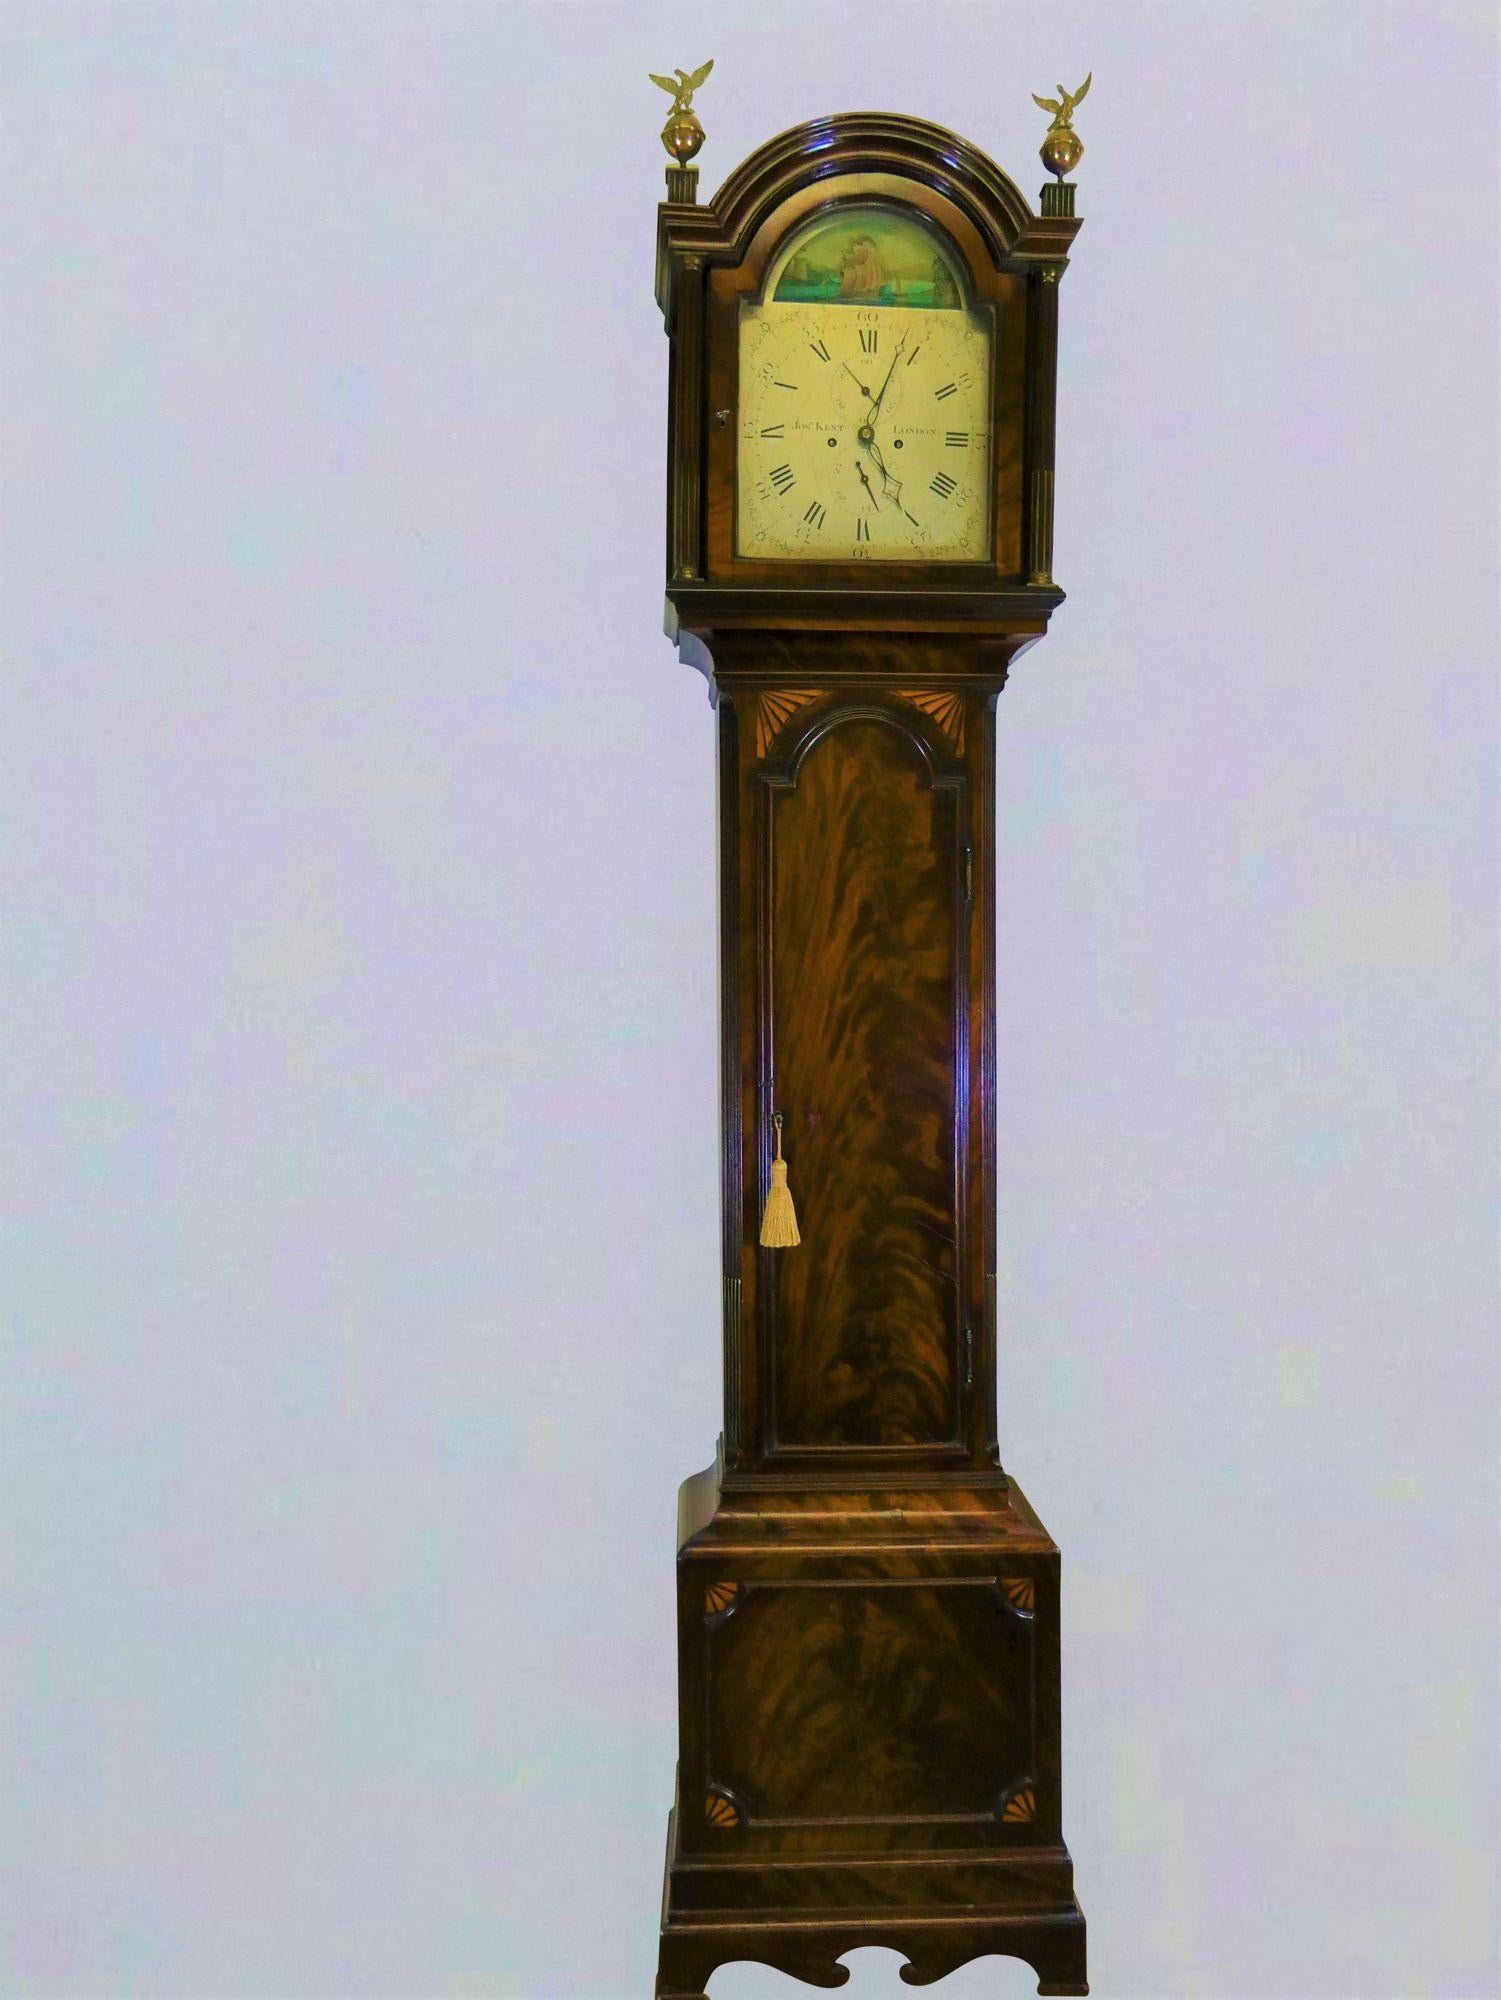 Georgian Mahogany Longcase Clock with Rocking Ship Automation, Joseph Kent, London.
 
Fine flame mahogany case with break arch hood, reeded pillars with brass capitals to either side of the glazed door surmounted by two brass finials.
Long break